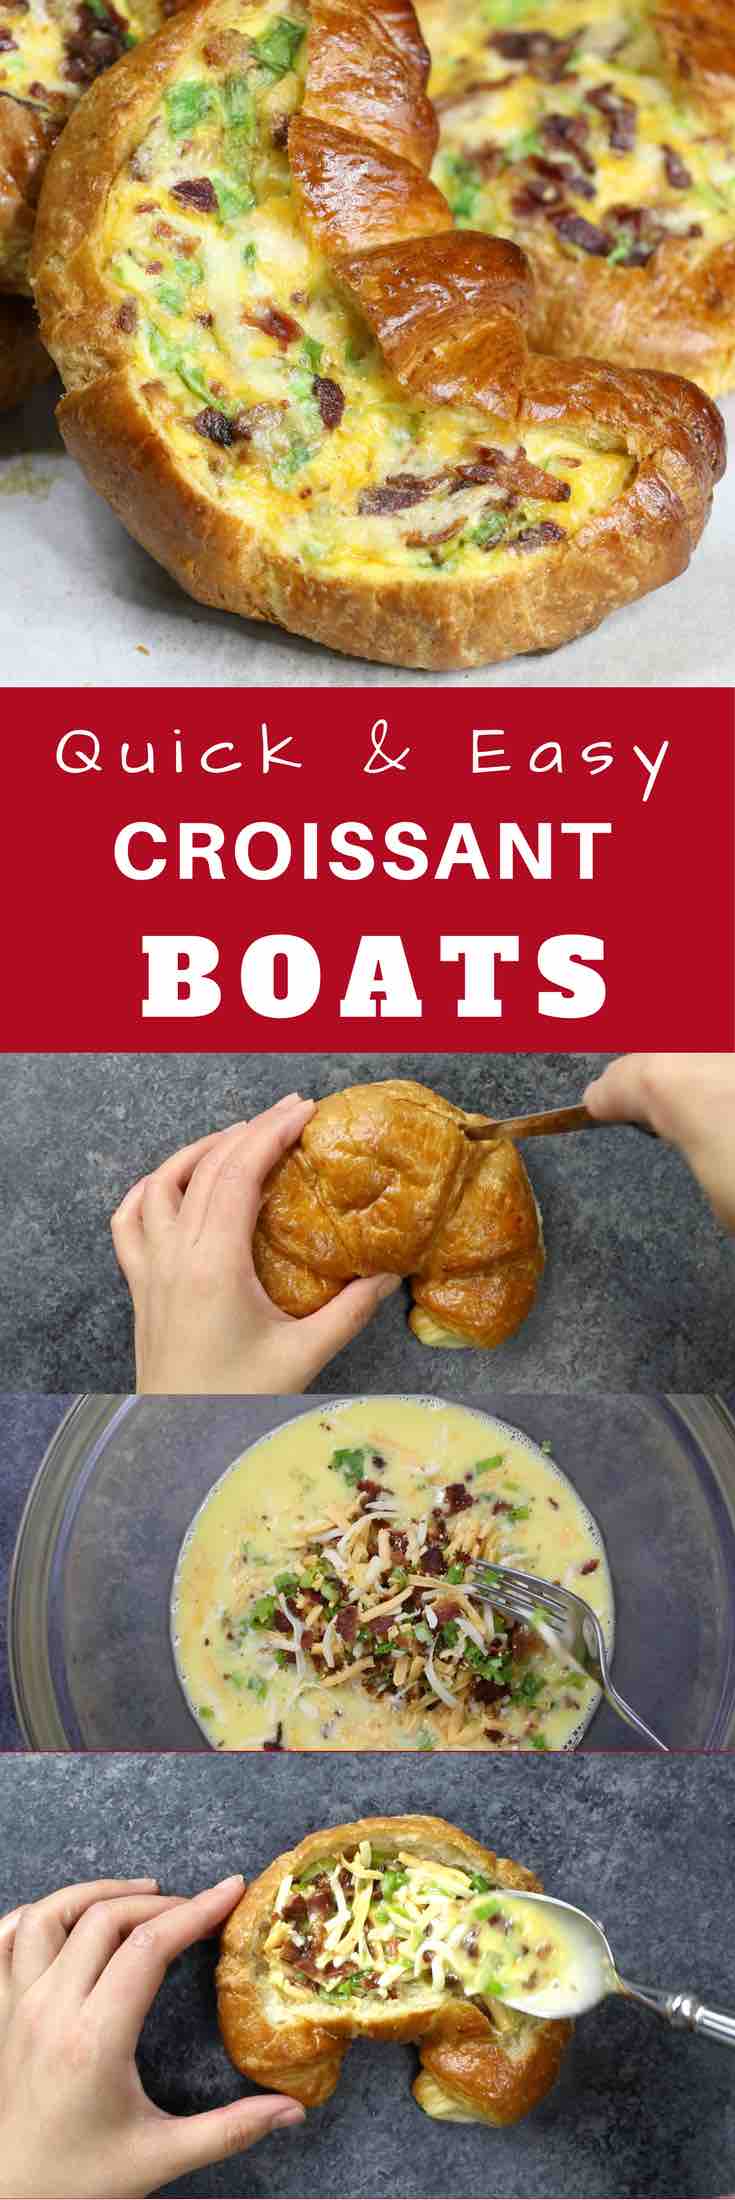 Breakfast Croissant Boats are hollowed-out croissants filled with beaten eggs, crispy bacon and melted cheese before being baked to perfection! So much more interesting than breakfast sandwiches and ready in 30 minutes for breakfast or brunch. #breakfastcroissant 